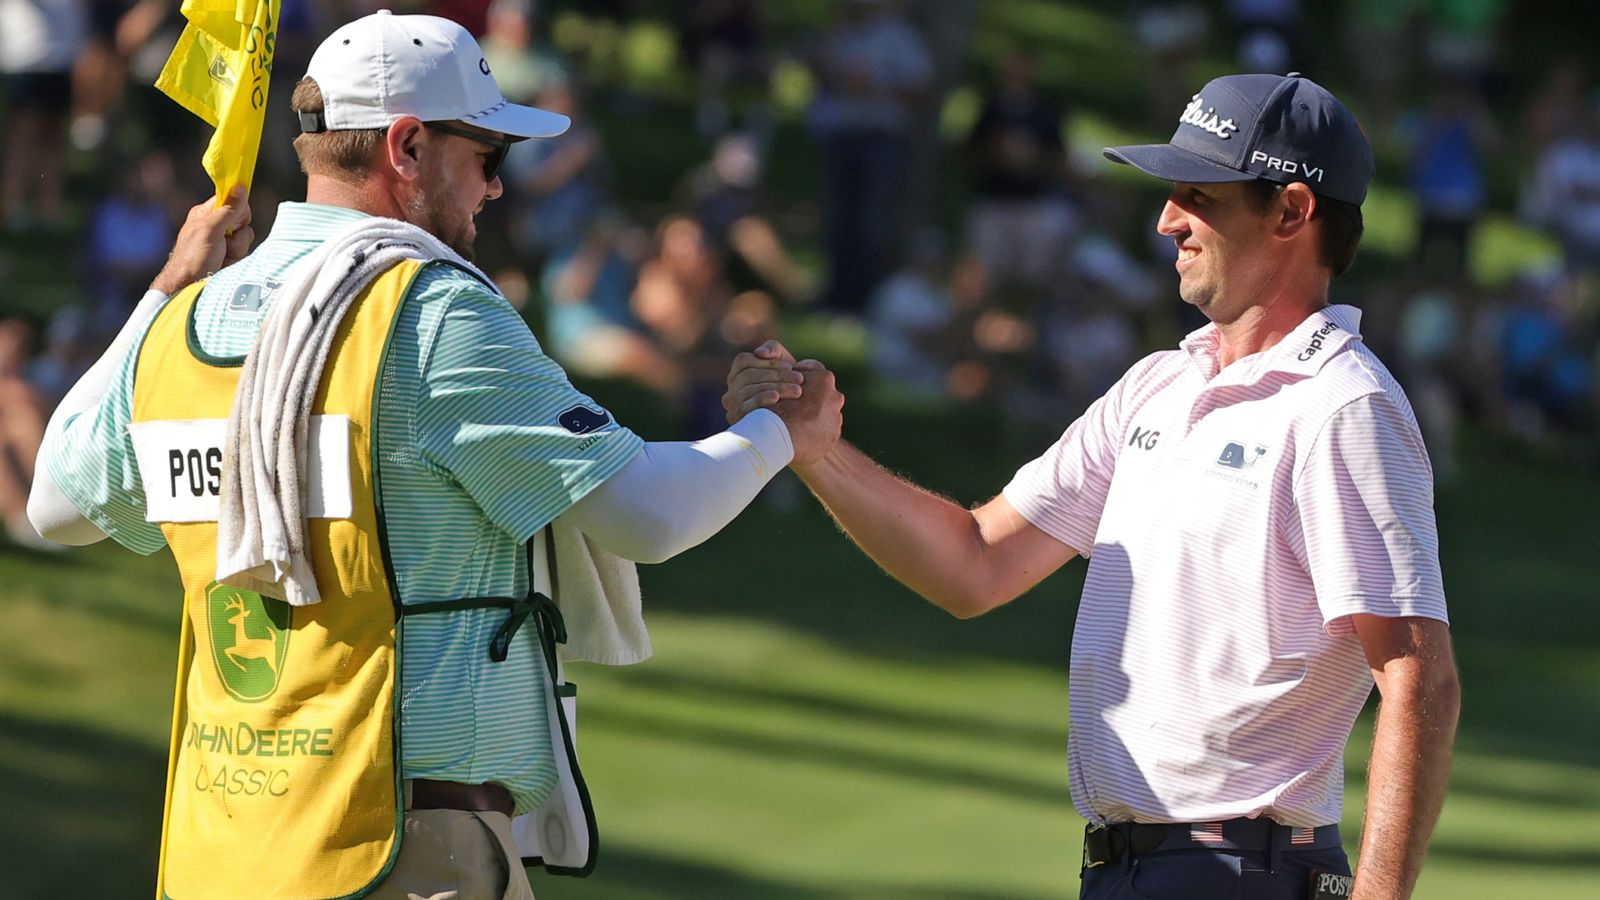 John Deere Classic: JT Poston qualifies for The Open at St Andrews after wire-to-wire win